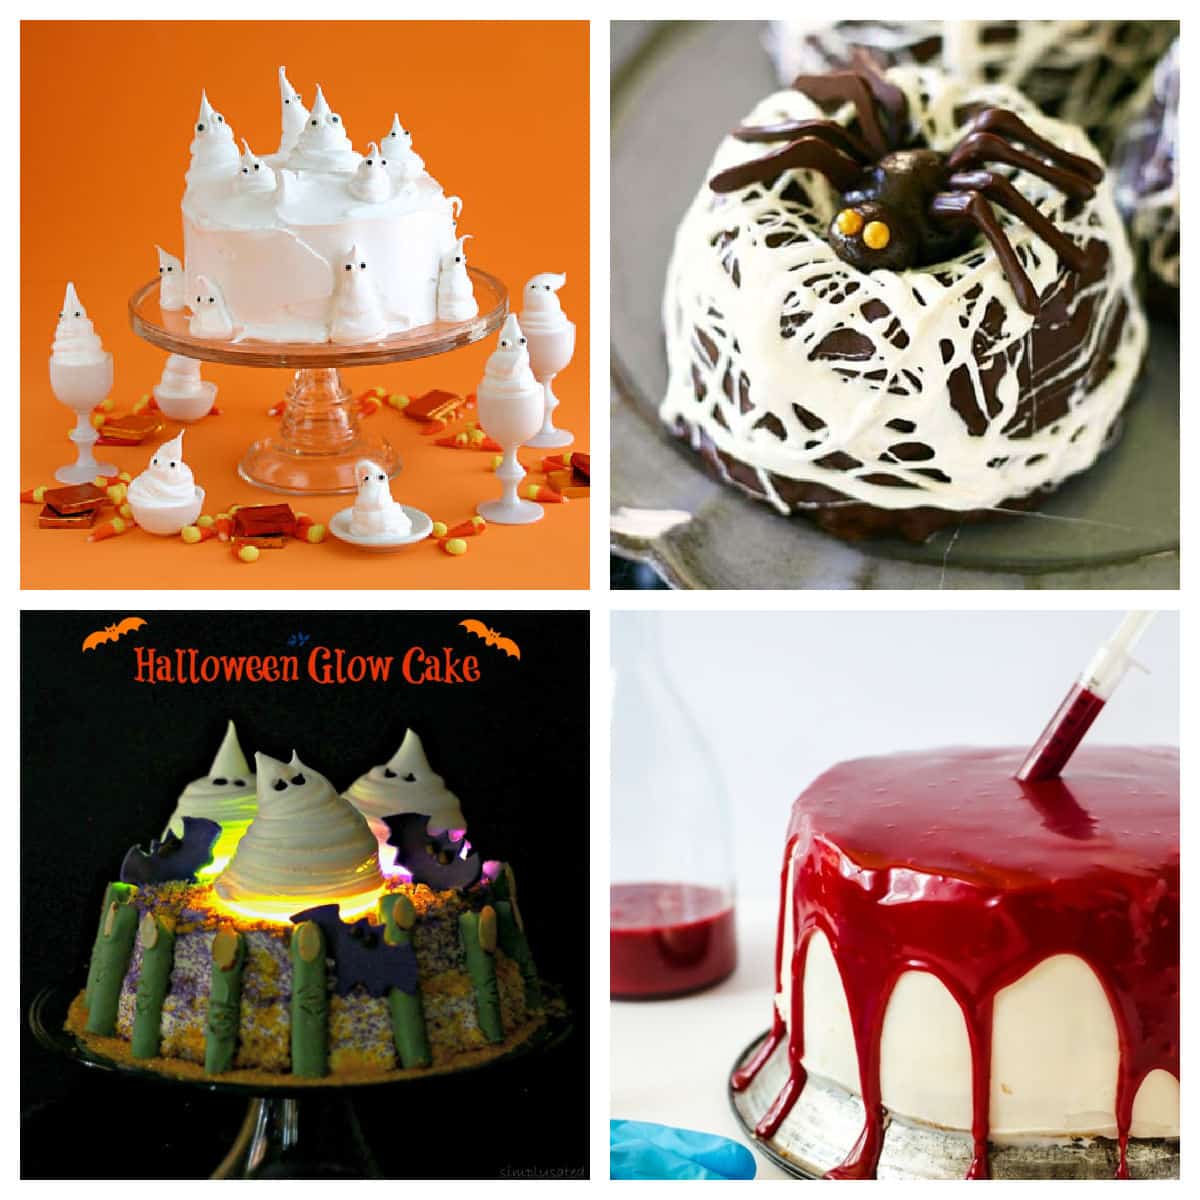 Collage of Halloween cakes.